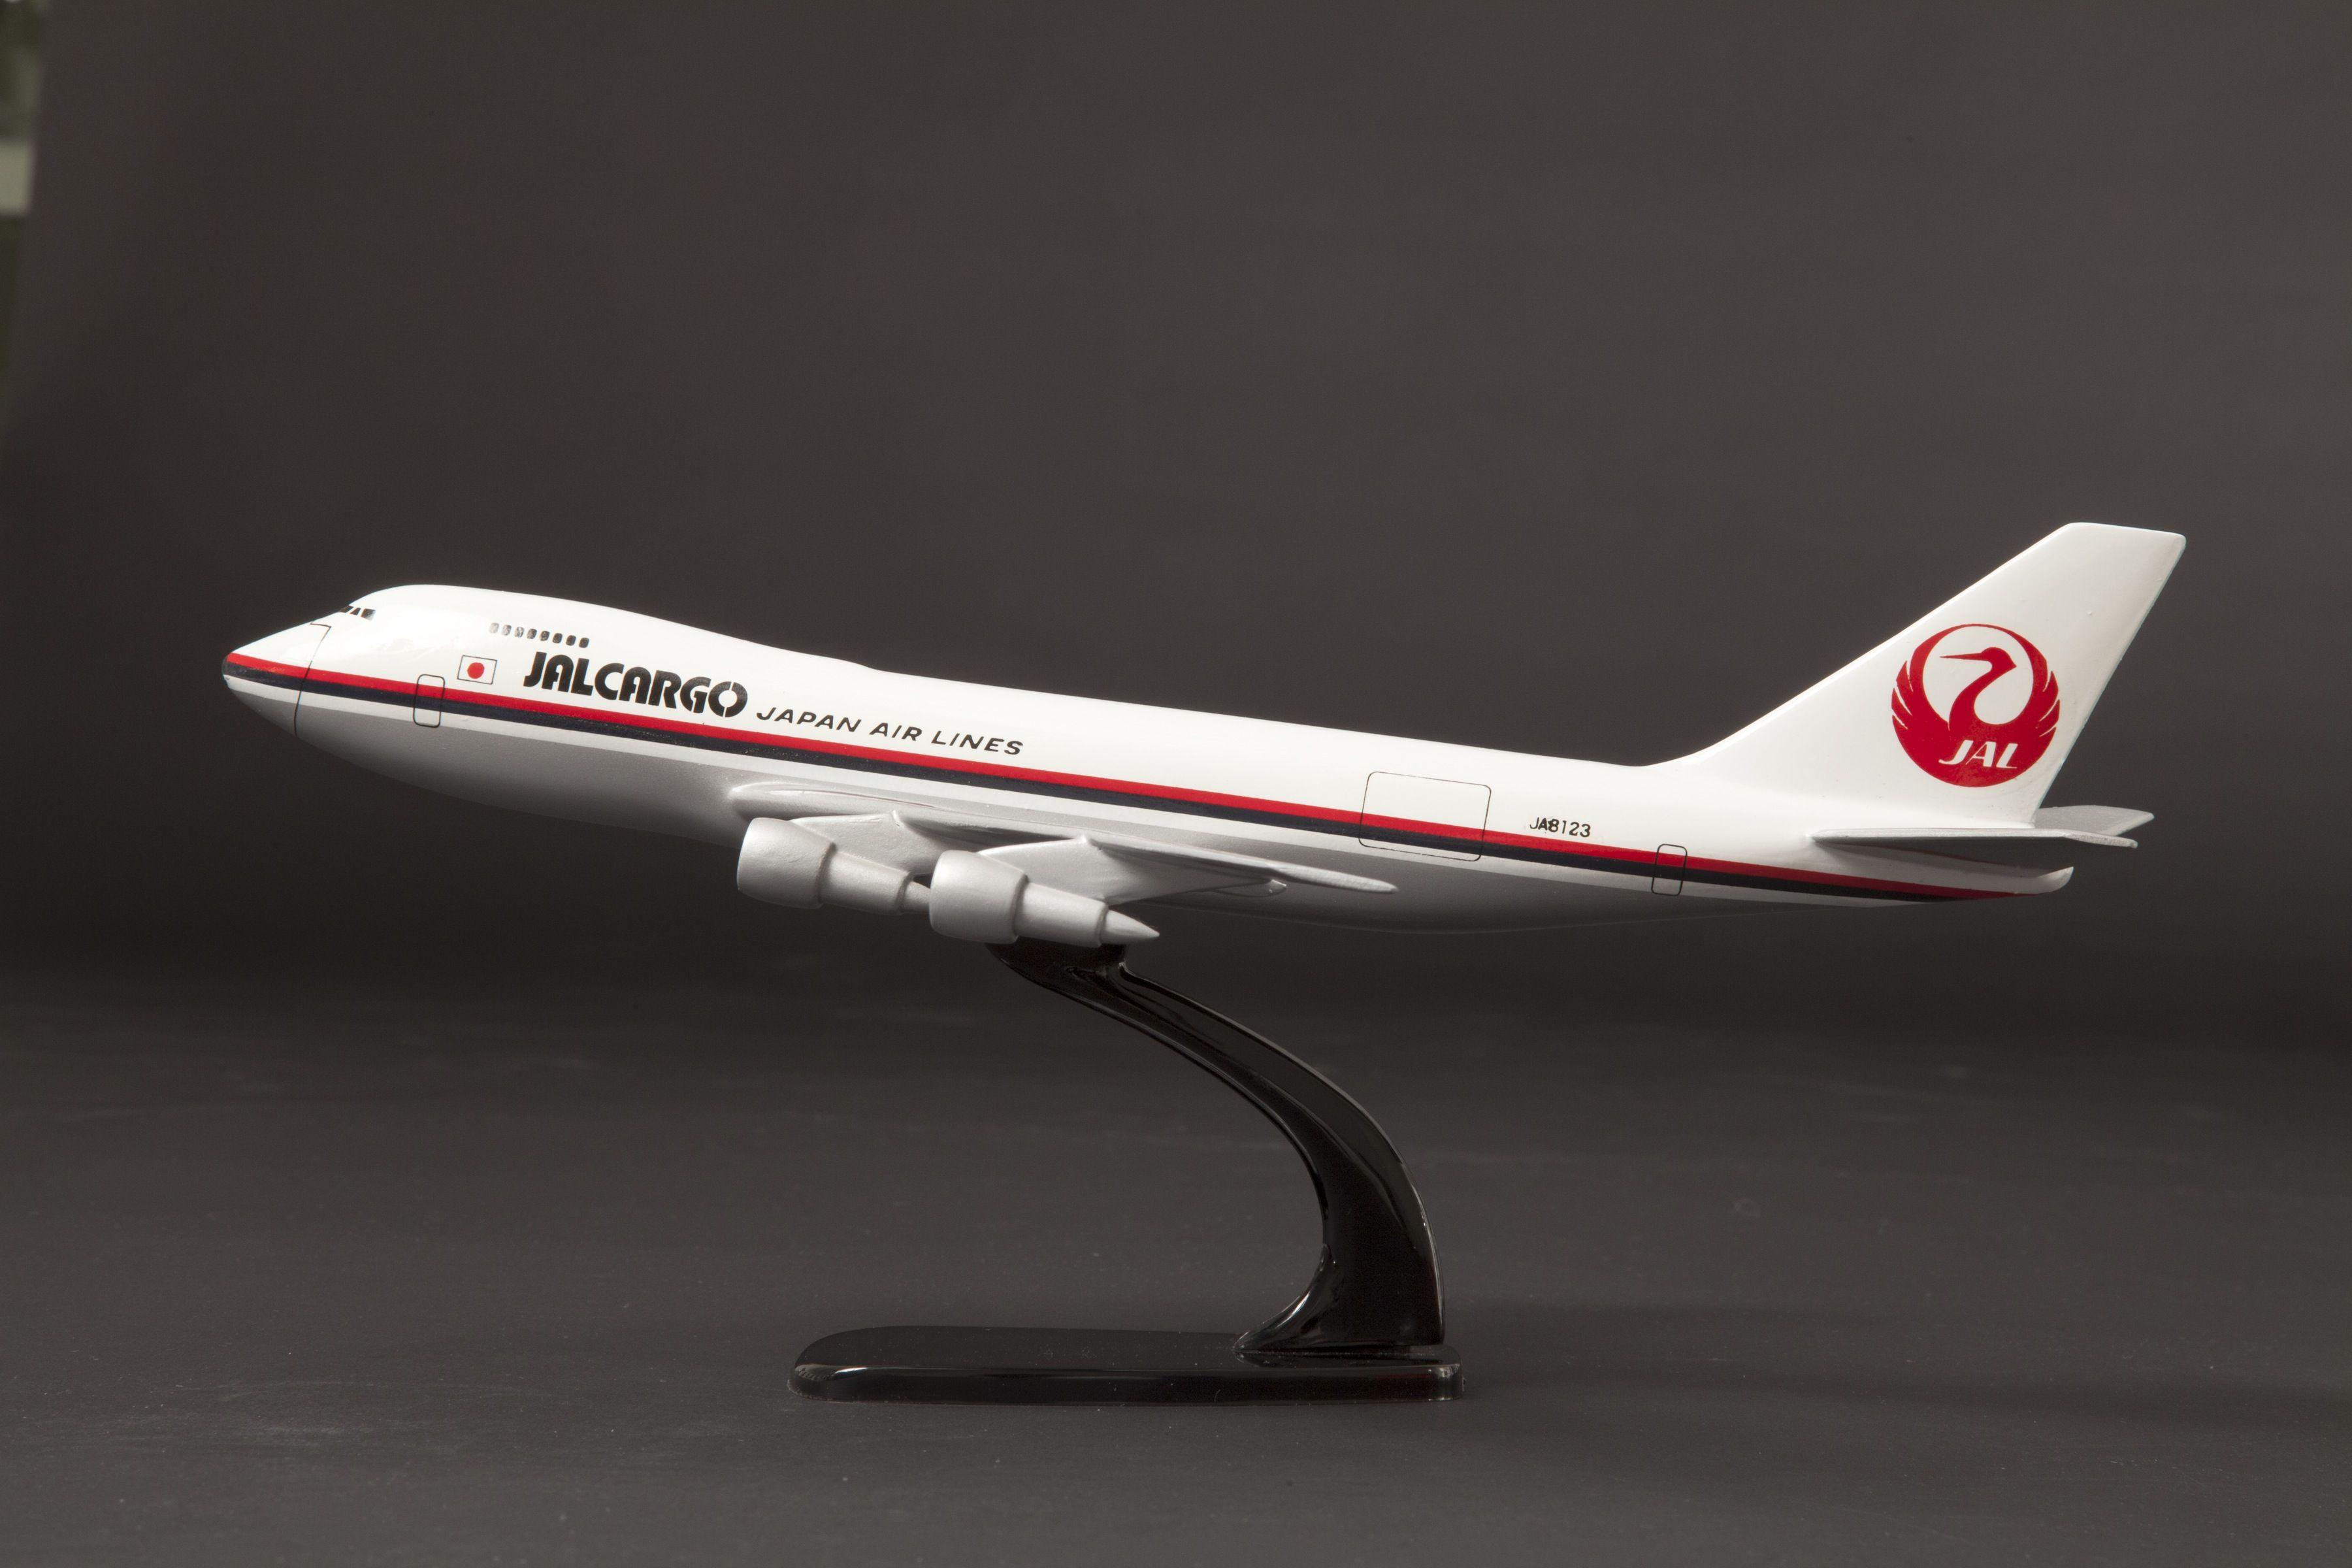 JAL Cargo Logo - Model Aircraft: JAL (Japan Airlines) Cargo, Boeing 747 246F. San